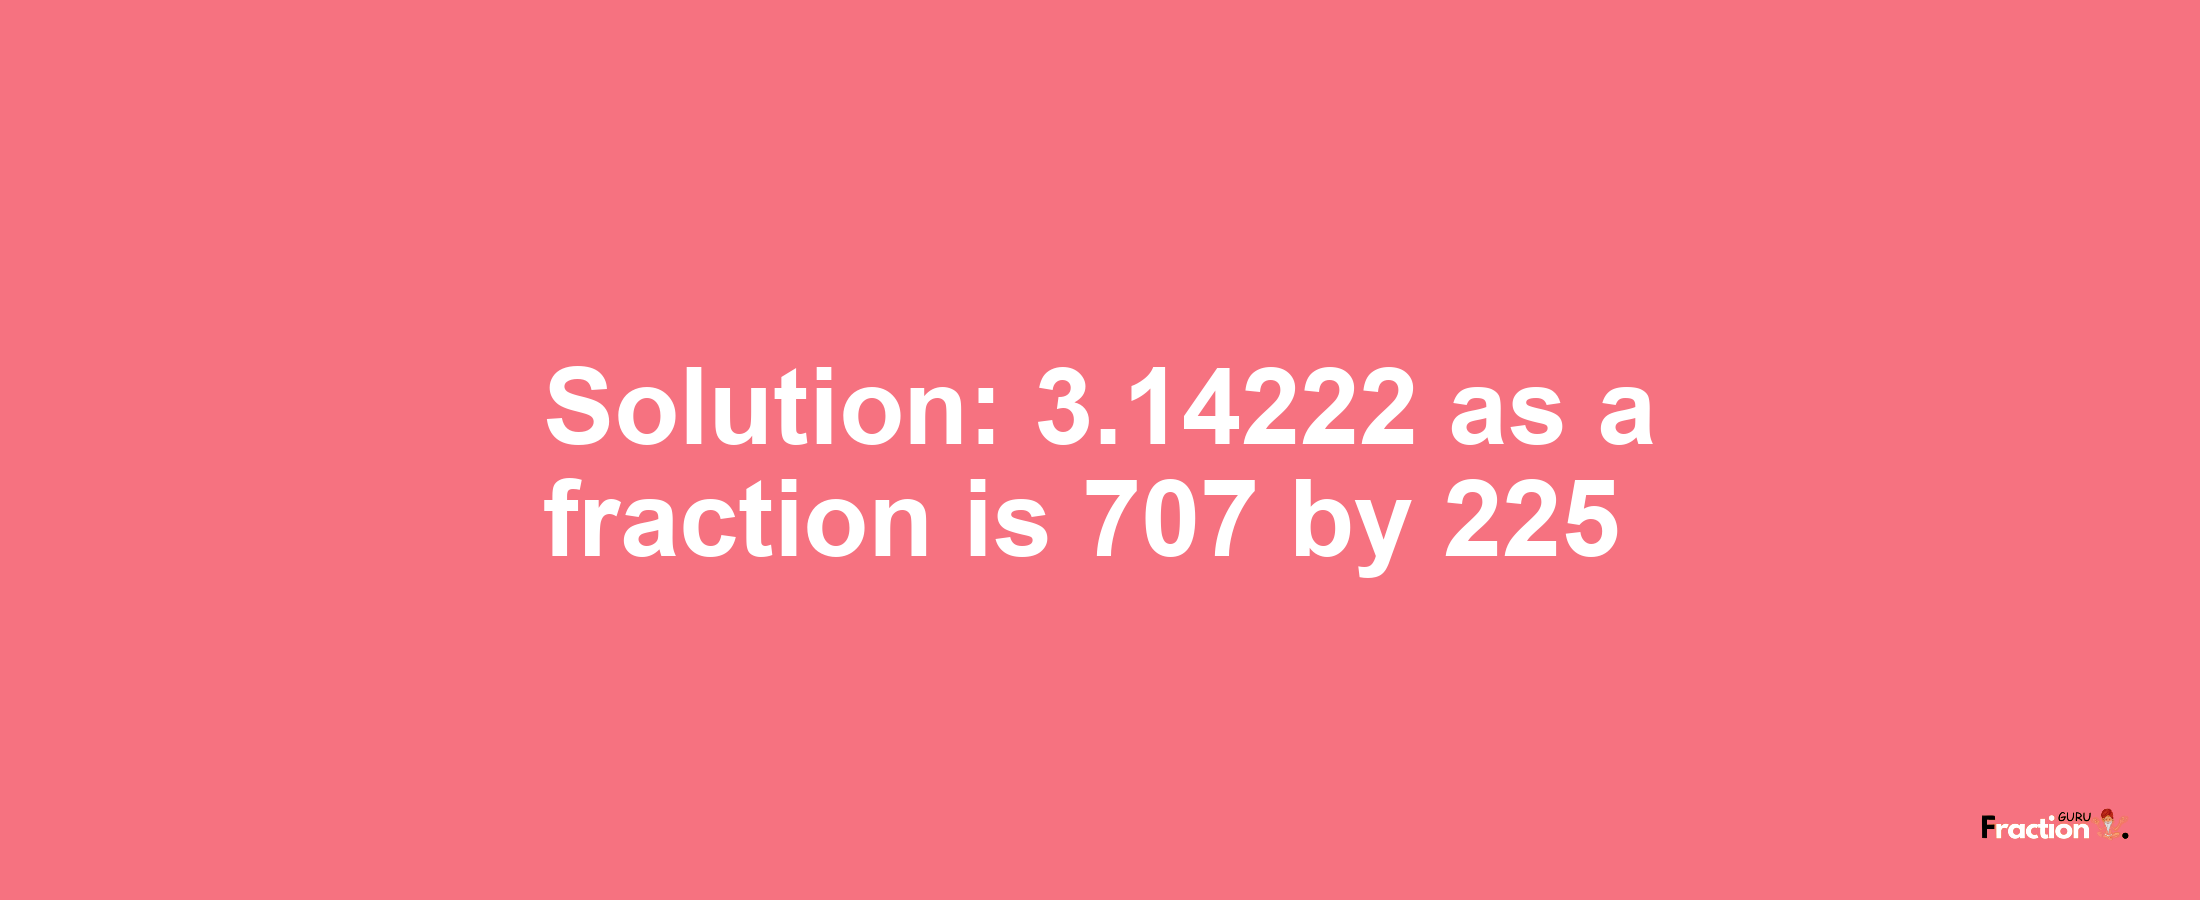 Solution:3.14222 as a fraction is 707/225